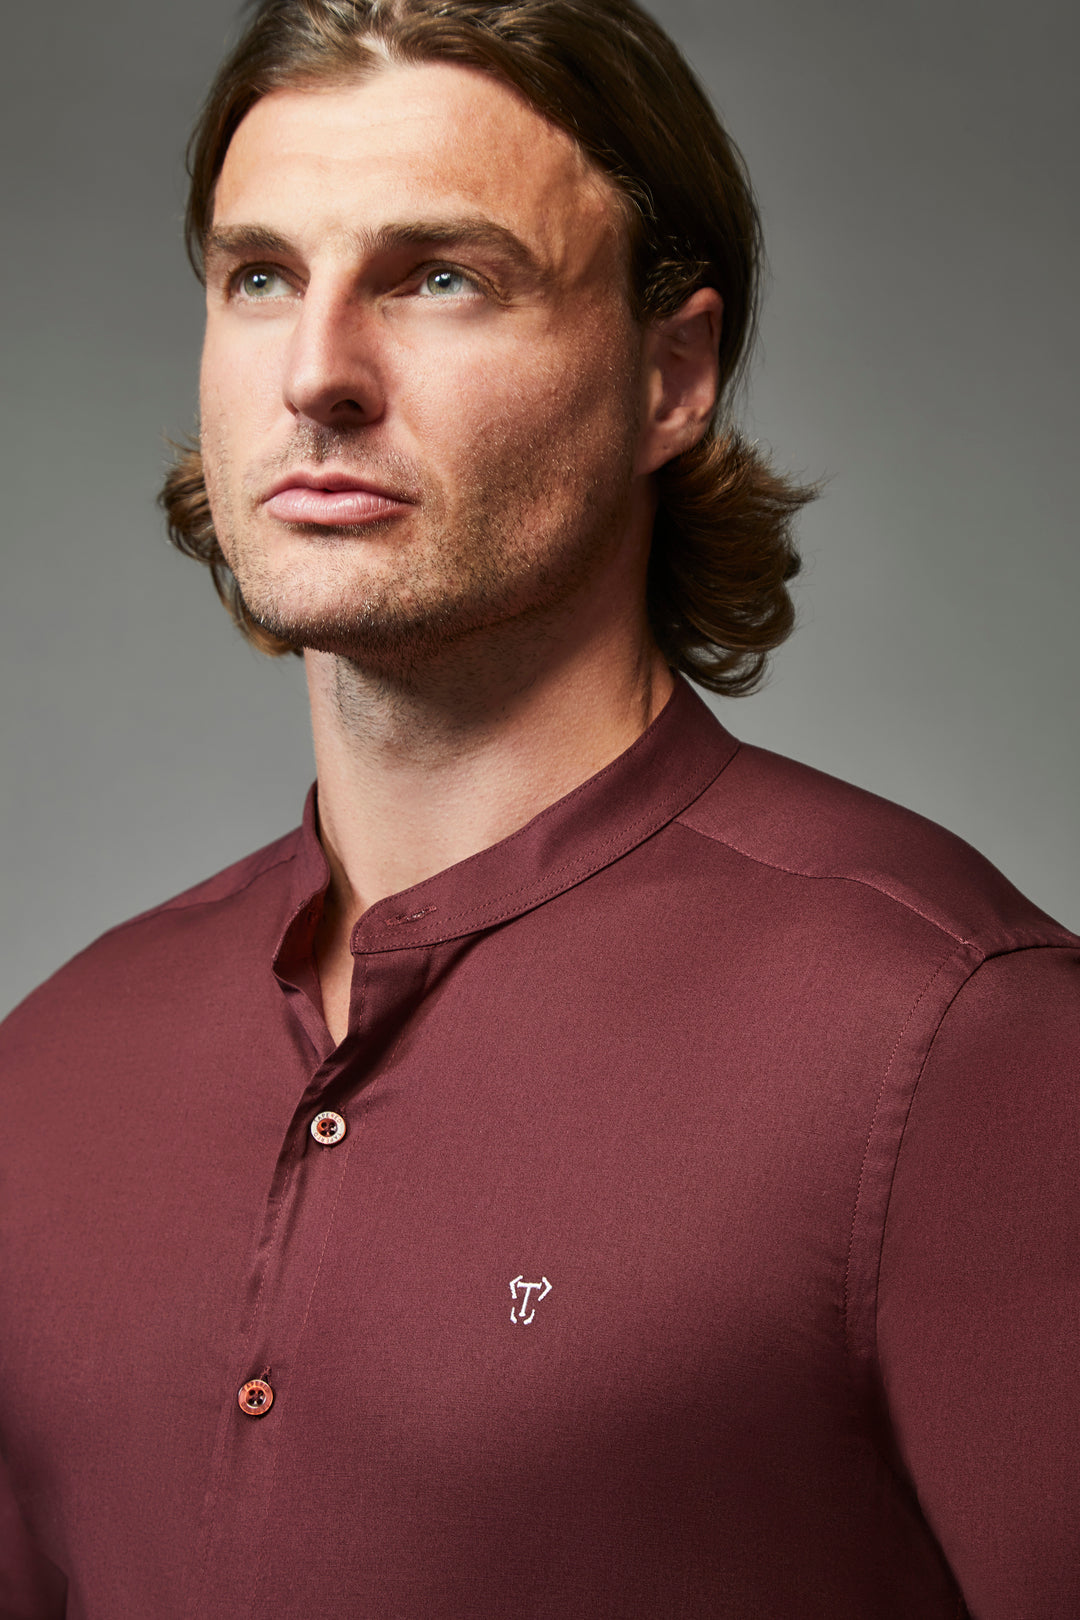 Burgundy grandad collar shirt designed for a tapered, muscular fit by Tapered Menswear.